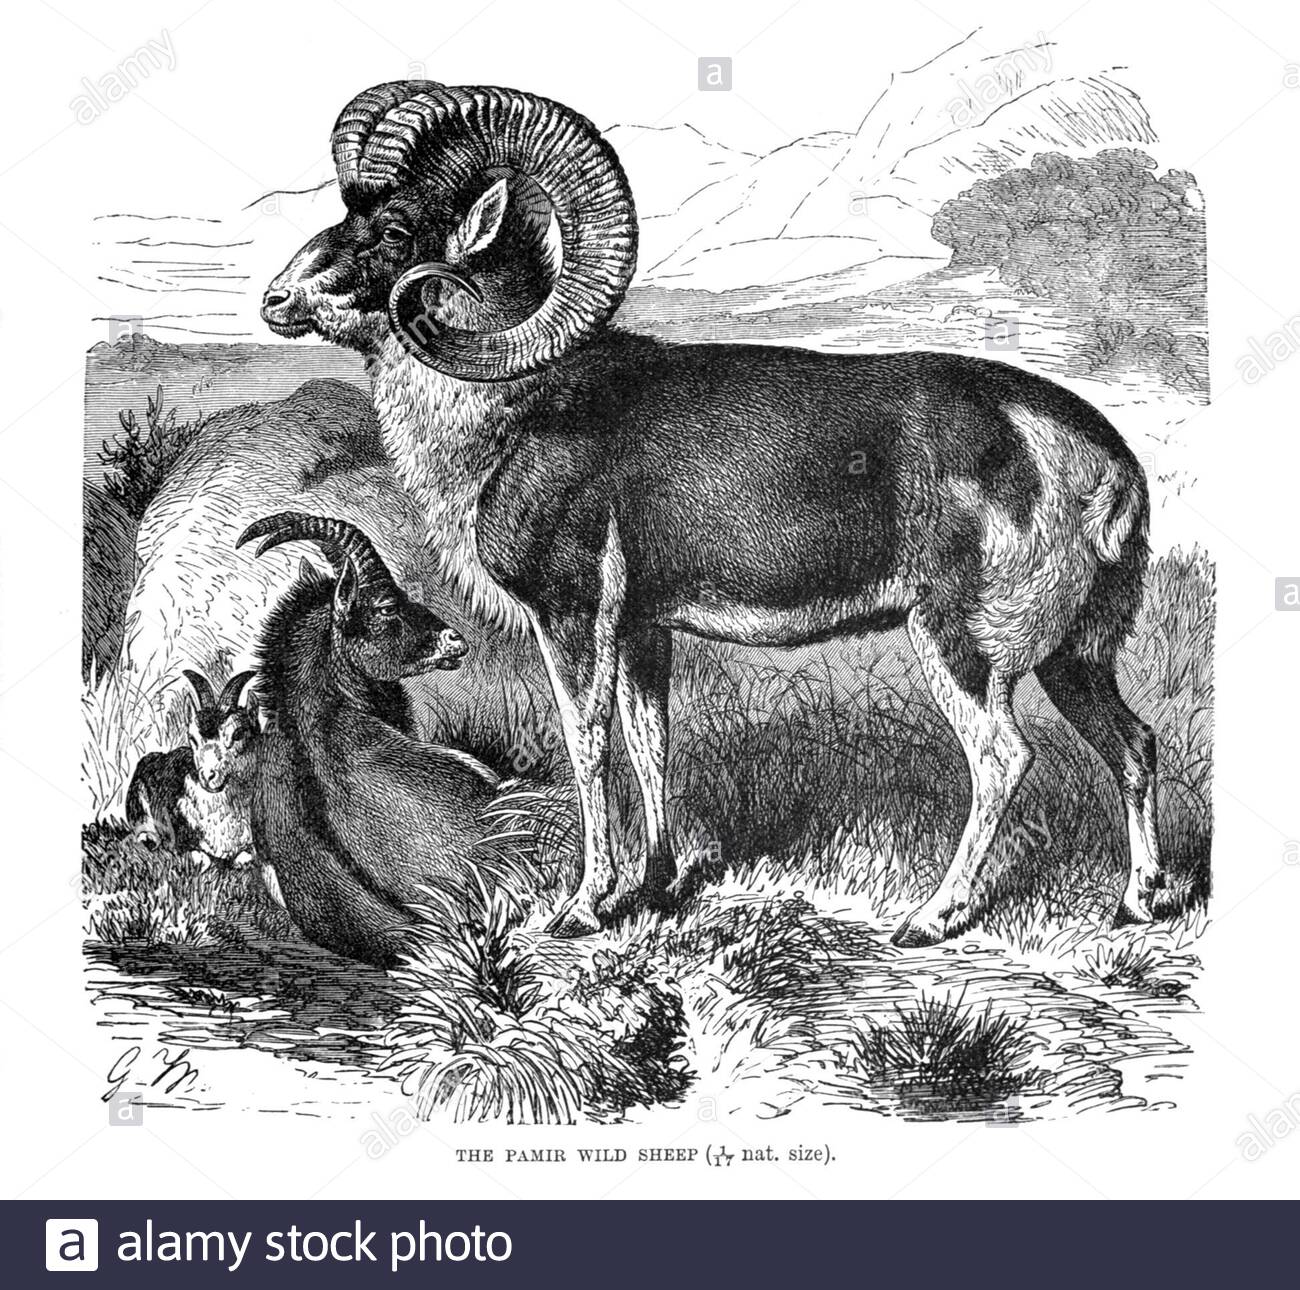 Pamir Wild Sheep (Marco Polo Sheep), vintage illustration from 1894 Stock Photo